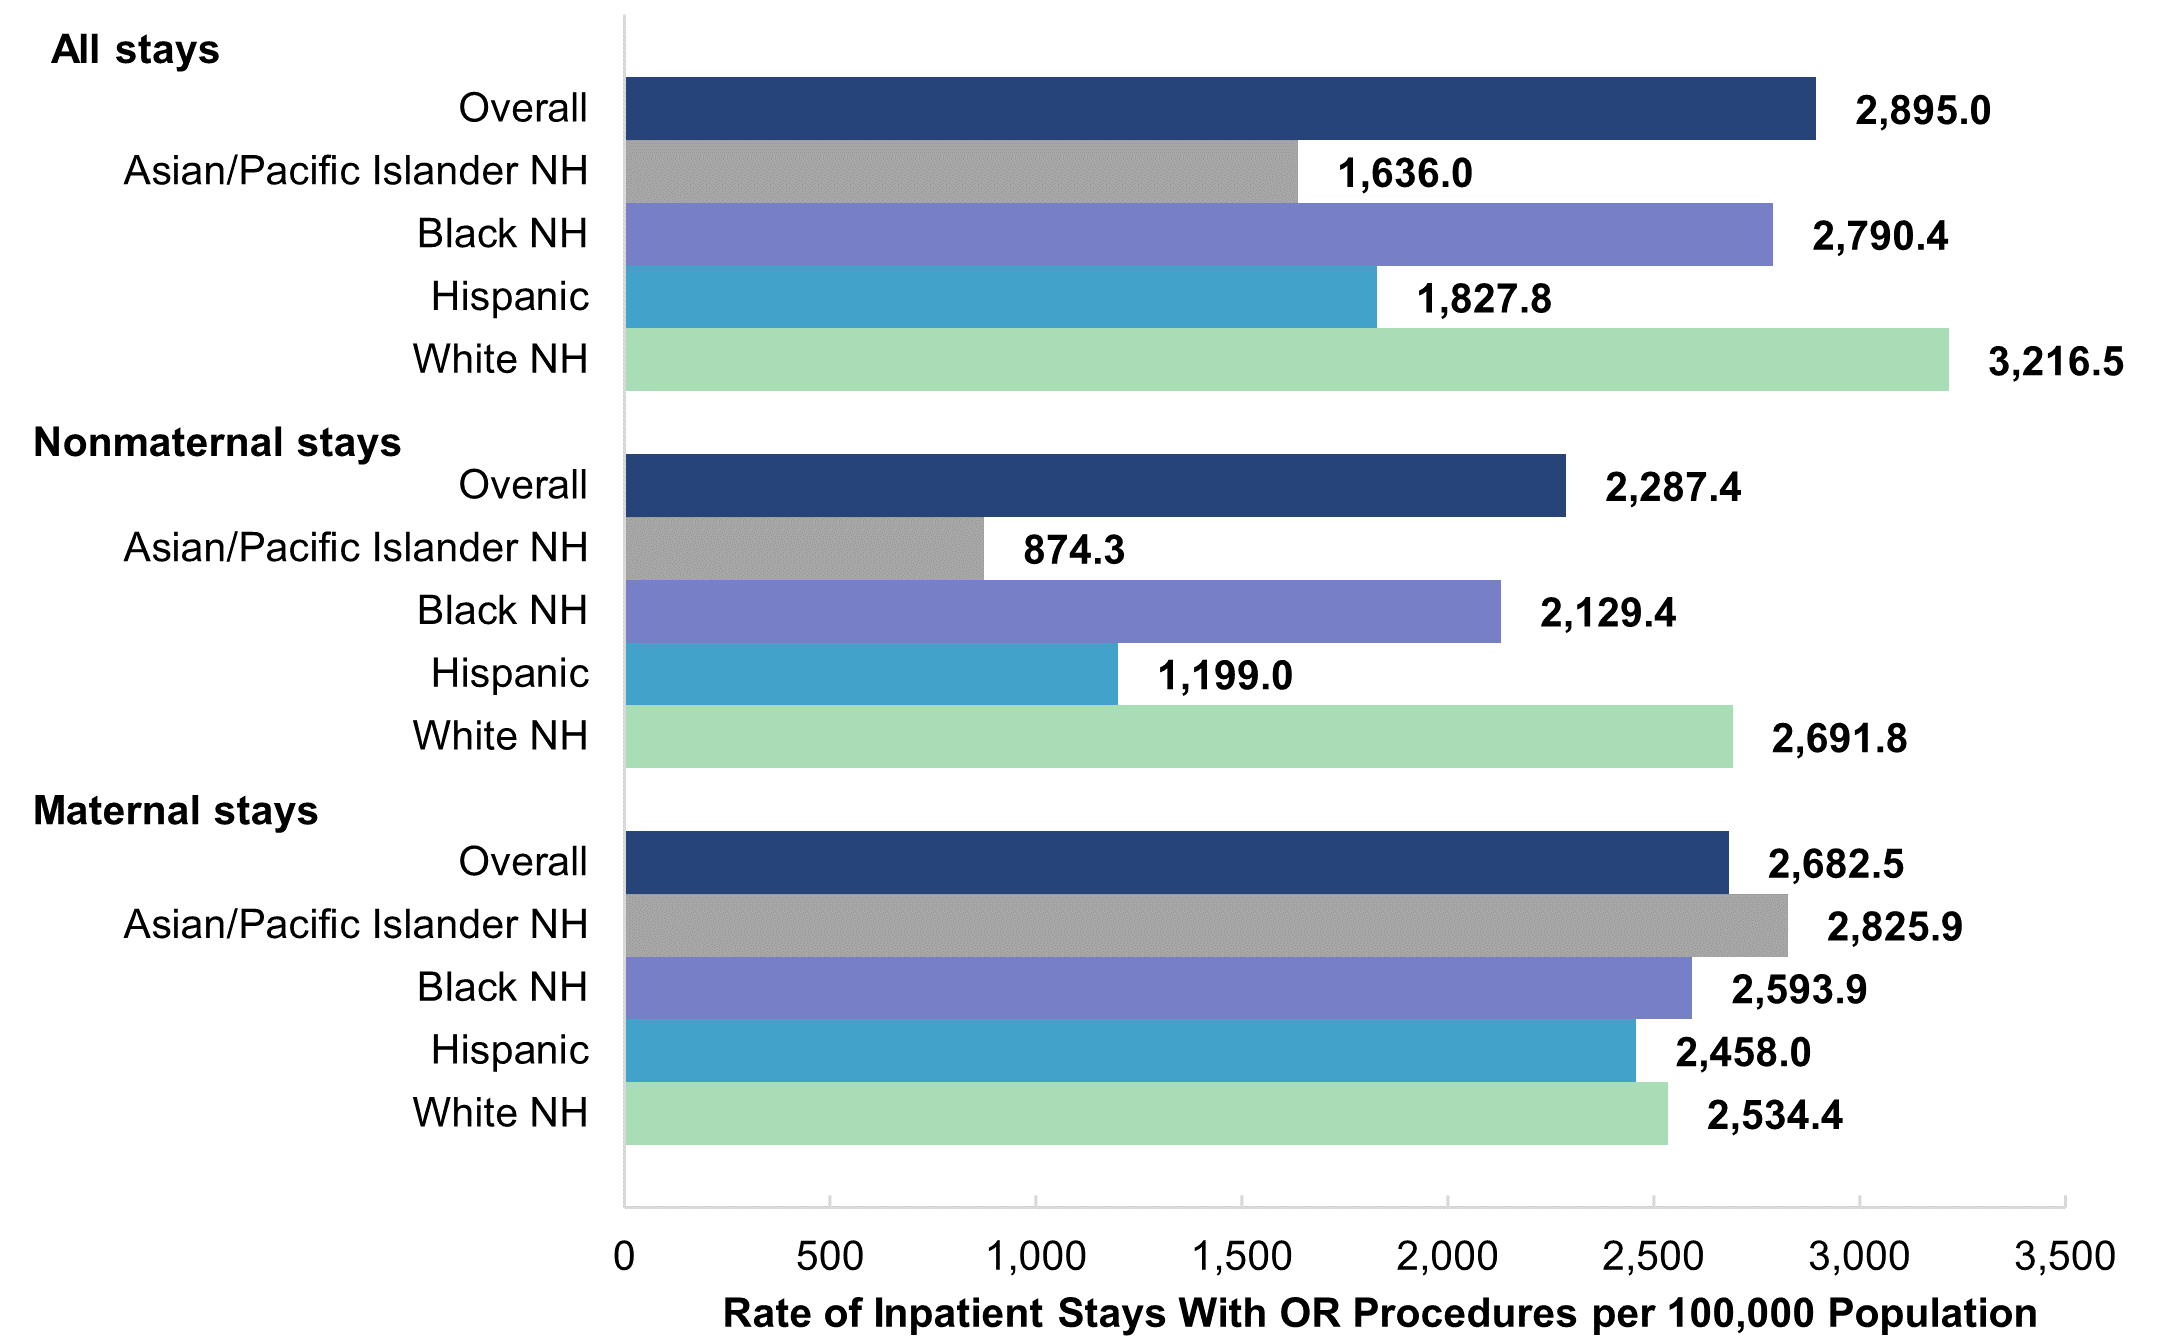 Bar chart showing the rate per 100,000 population of inpatient stays with operating room (OR) procedures 
					by the type of stay (nonmaternal or maternal) and patient race and ethnicity (Asian/Pacific Islander [API] 
					non-Hispanic [NH], Black NH, Hispanic, White NH) in 2019. All stays: overall (2,895.0), API NH (1,636.0), 
					Black NH (2,790.4), Hispanic (1,827.8), White NH (3,216.5). Nonmaternal stays: overall (2,287.4), API NH 
					(874.3), Black NH (2,129.4), Hispanic (1,199.0), White NH (2,691.8). Maternal stays: overall (2,682.5), API 
					NH (2,825.9), Black NH (2,593.9), Hispanic (2,458.0), White NH (2,534.4).